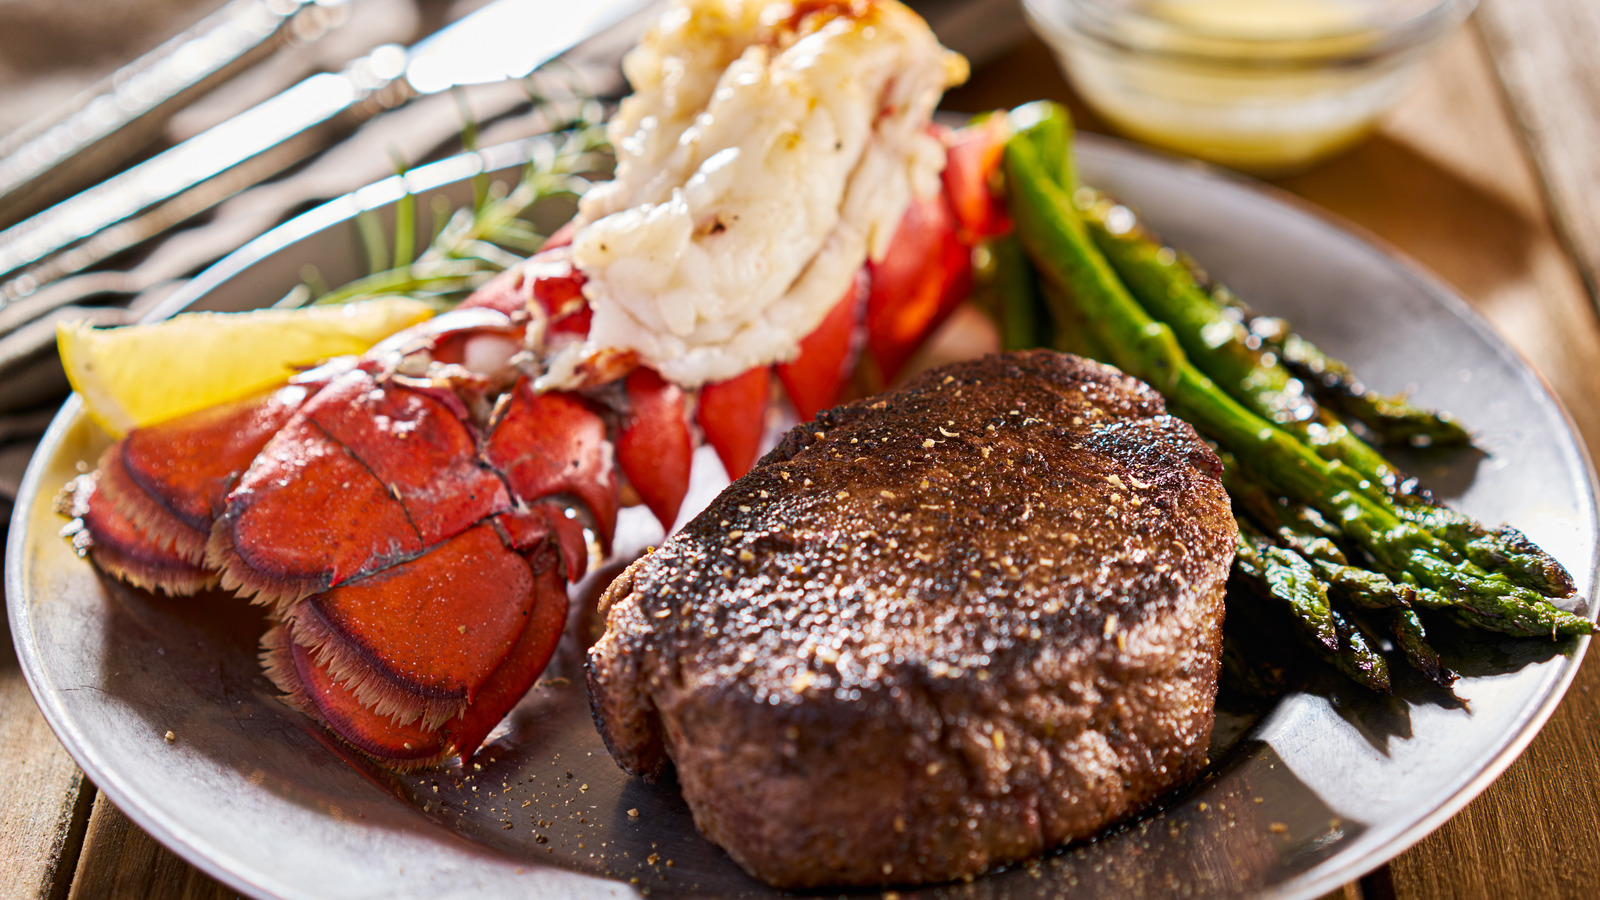 Where Did The Surf And Turf Originate?